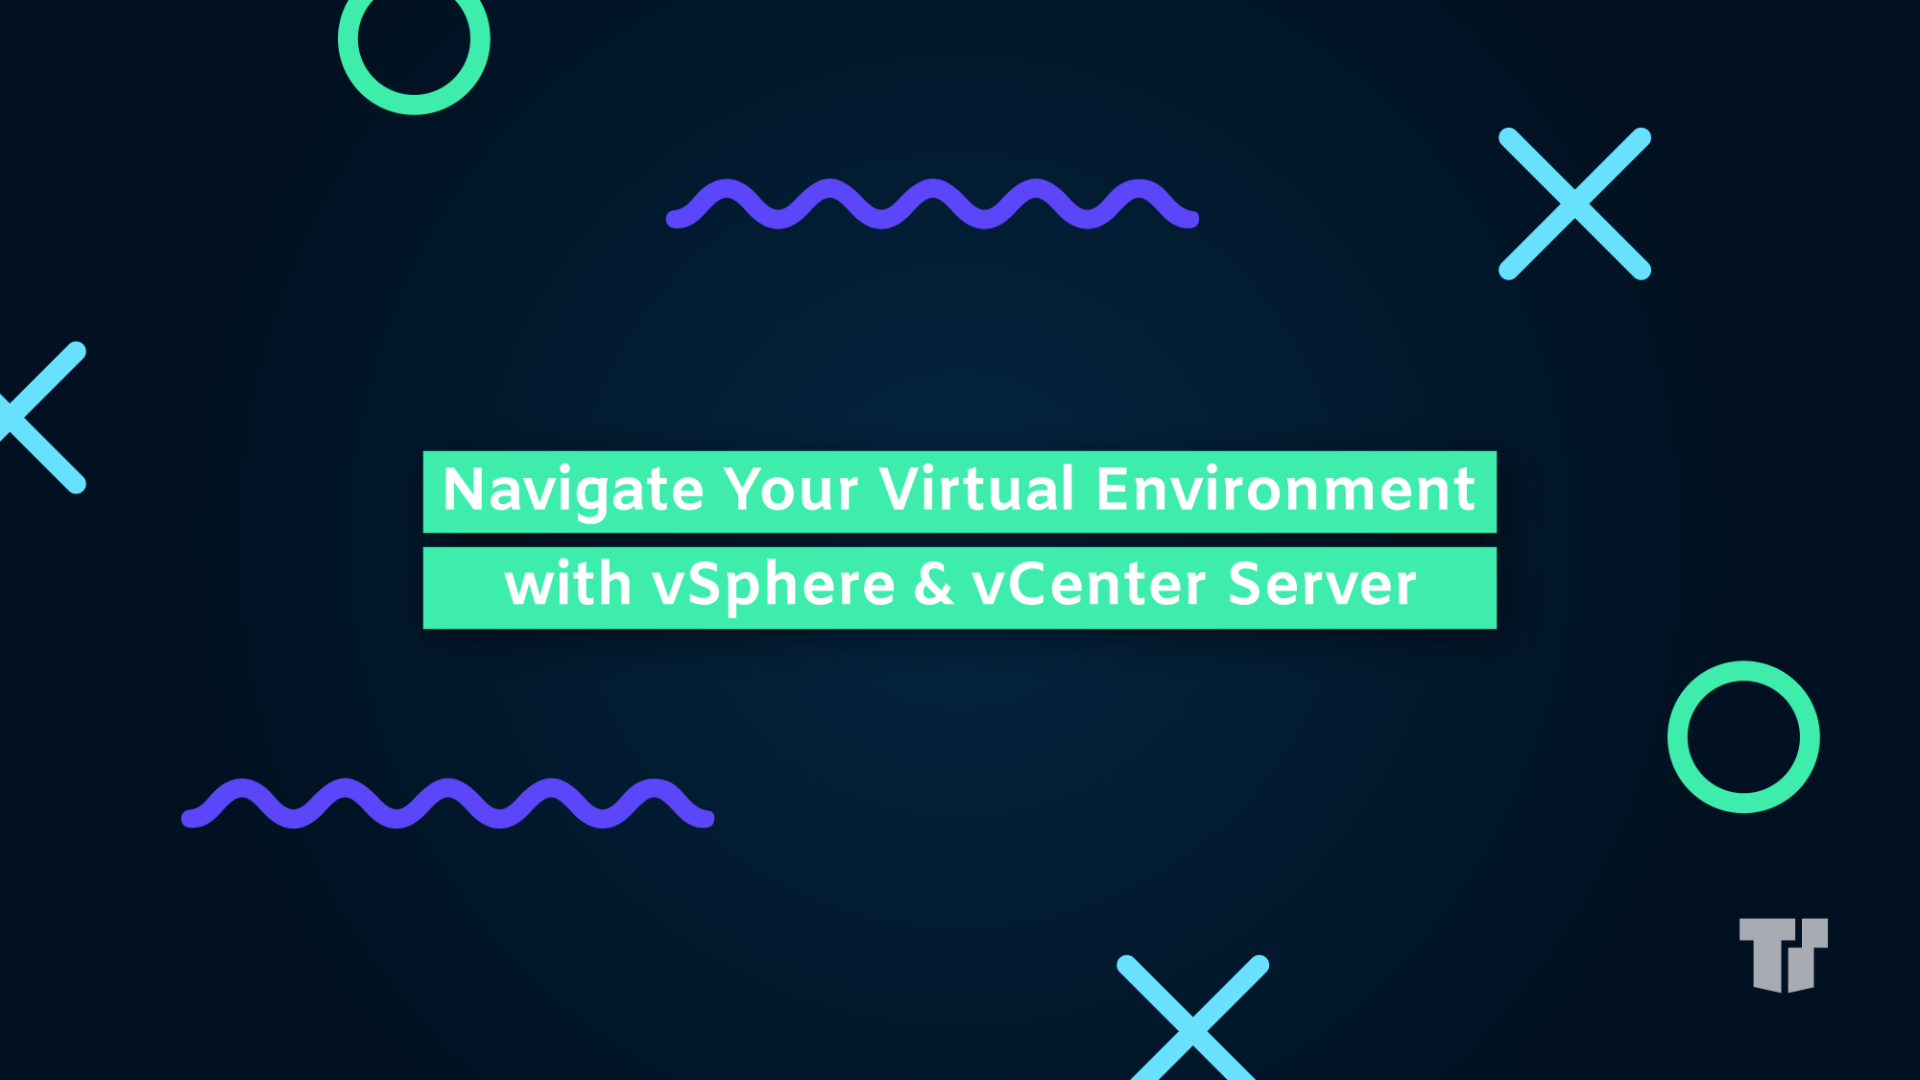 Navigate Your Virtual Environment with vSphere & vCenter Server cover image